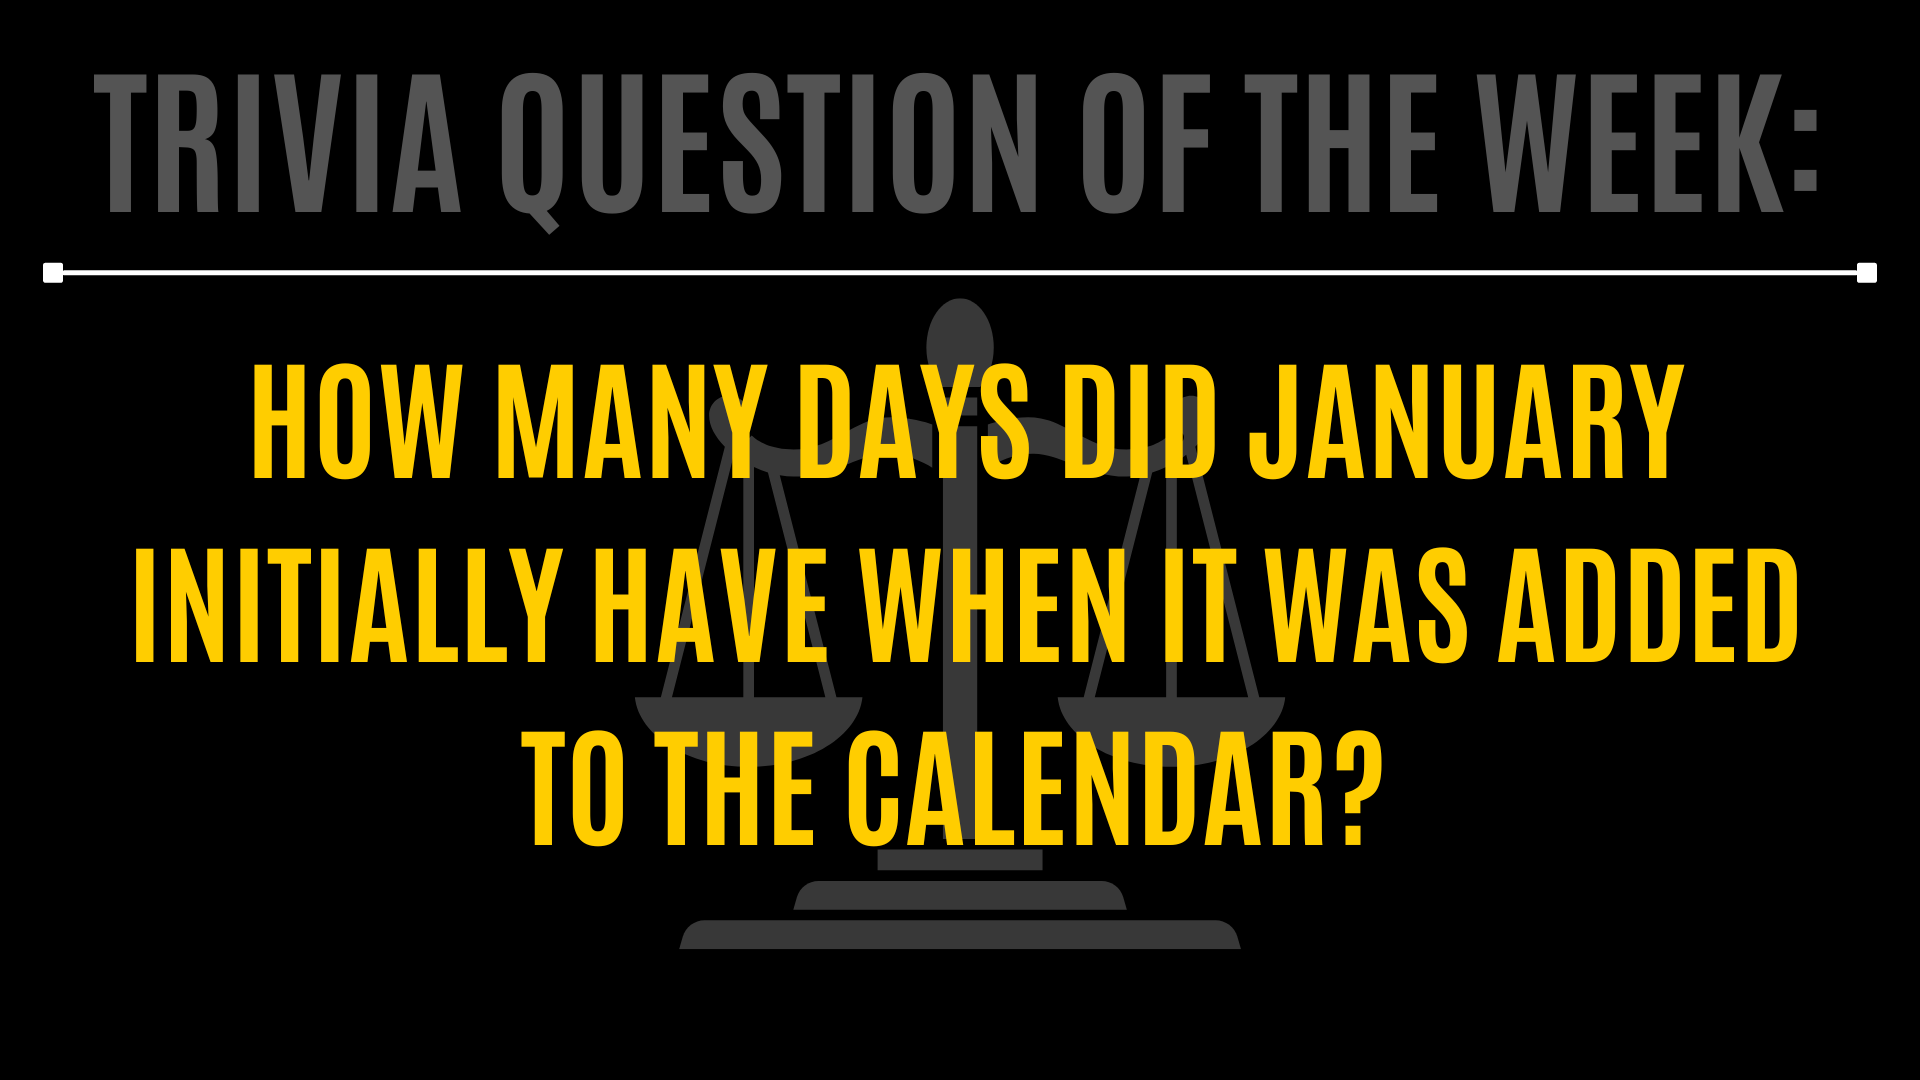 Trivia Question of the Week: How many days did January initially have when it was added to the calendar? 